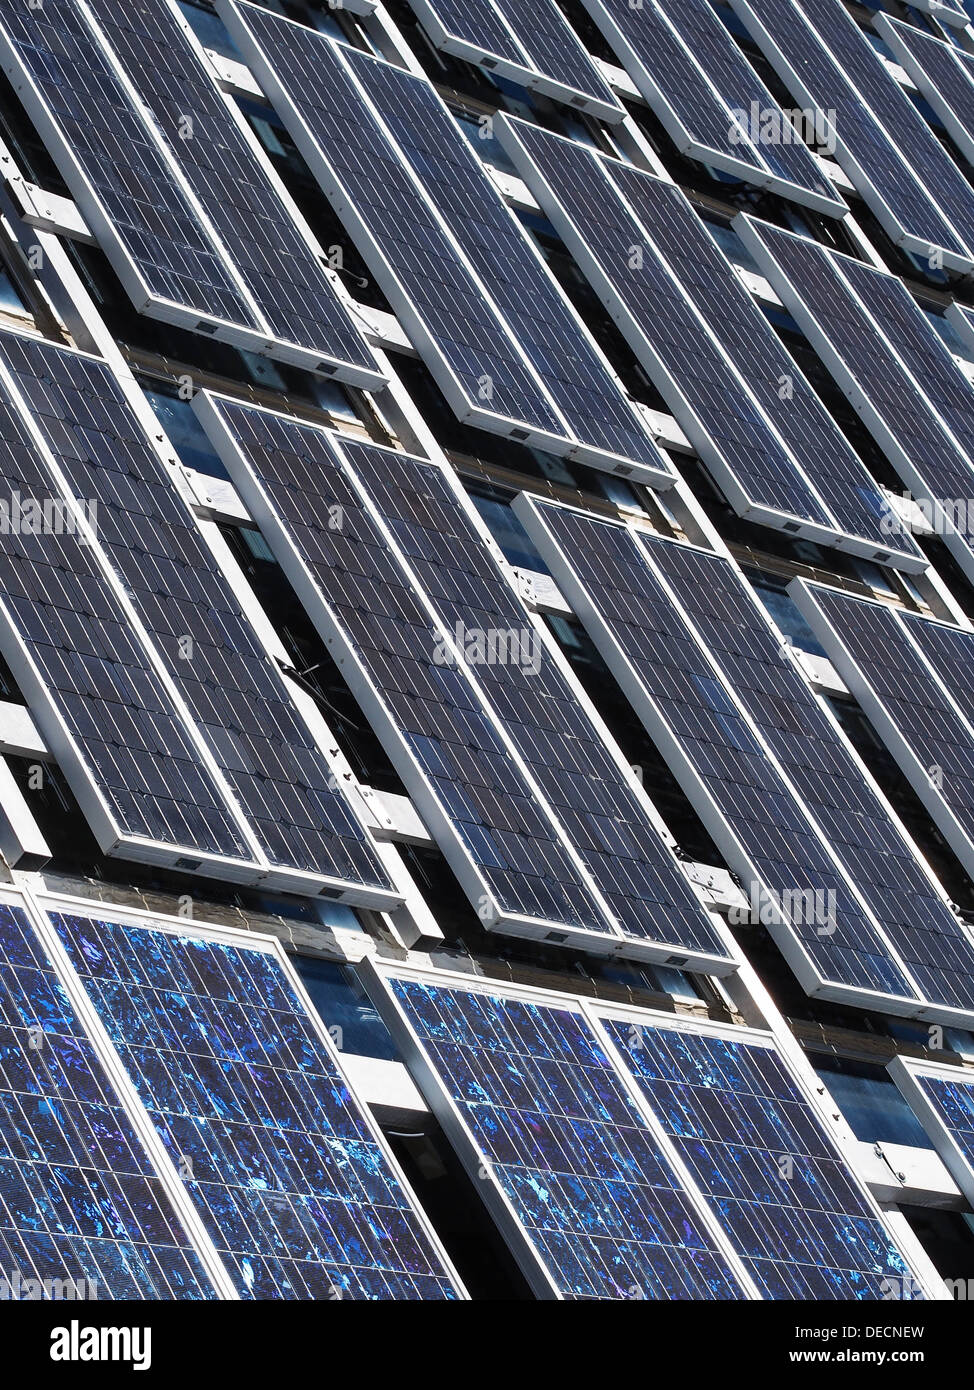 View of photovoltaic solar panels, which absorb sunlight as a source of energy to generate electricity. Stock Photo